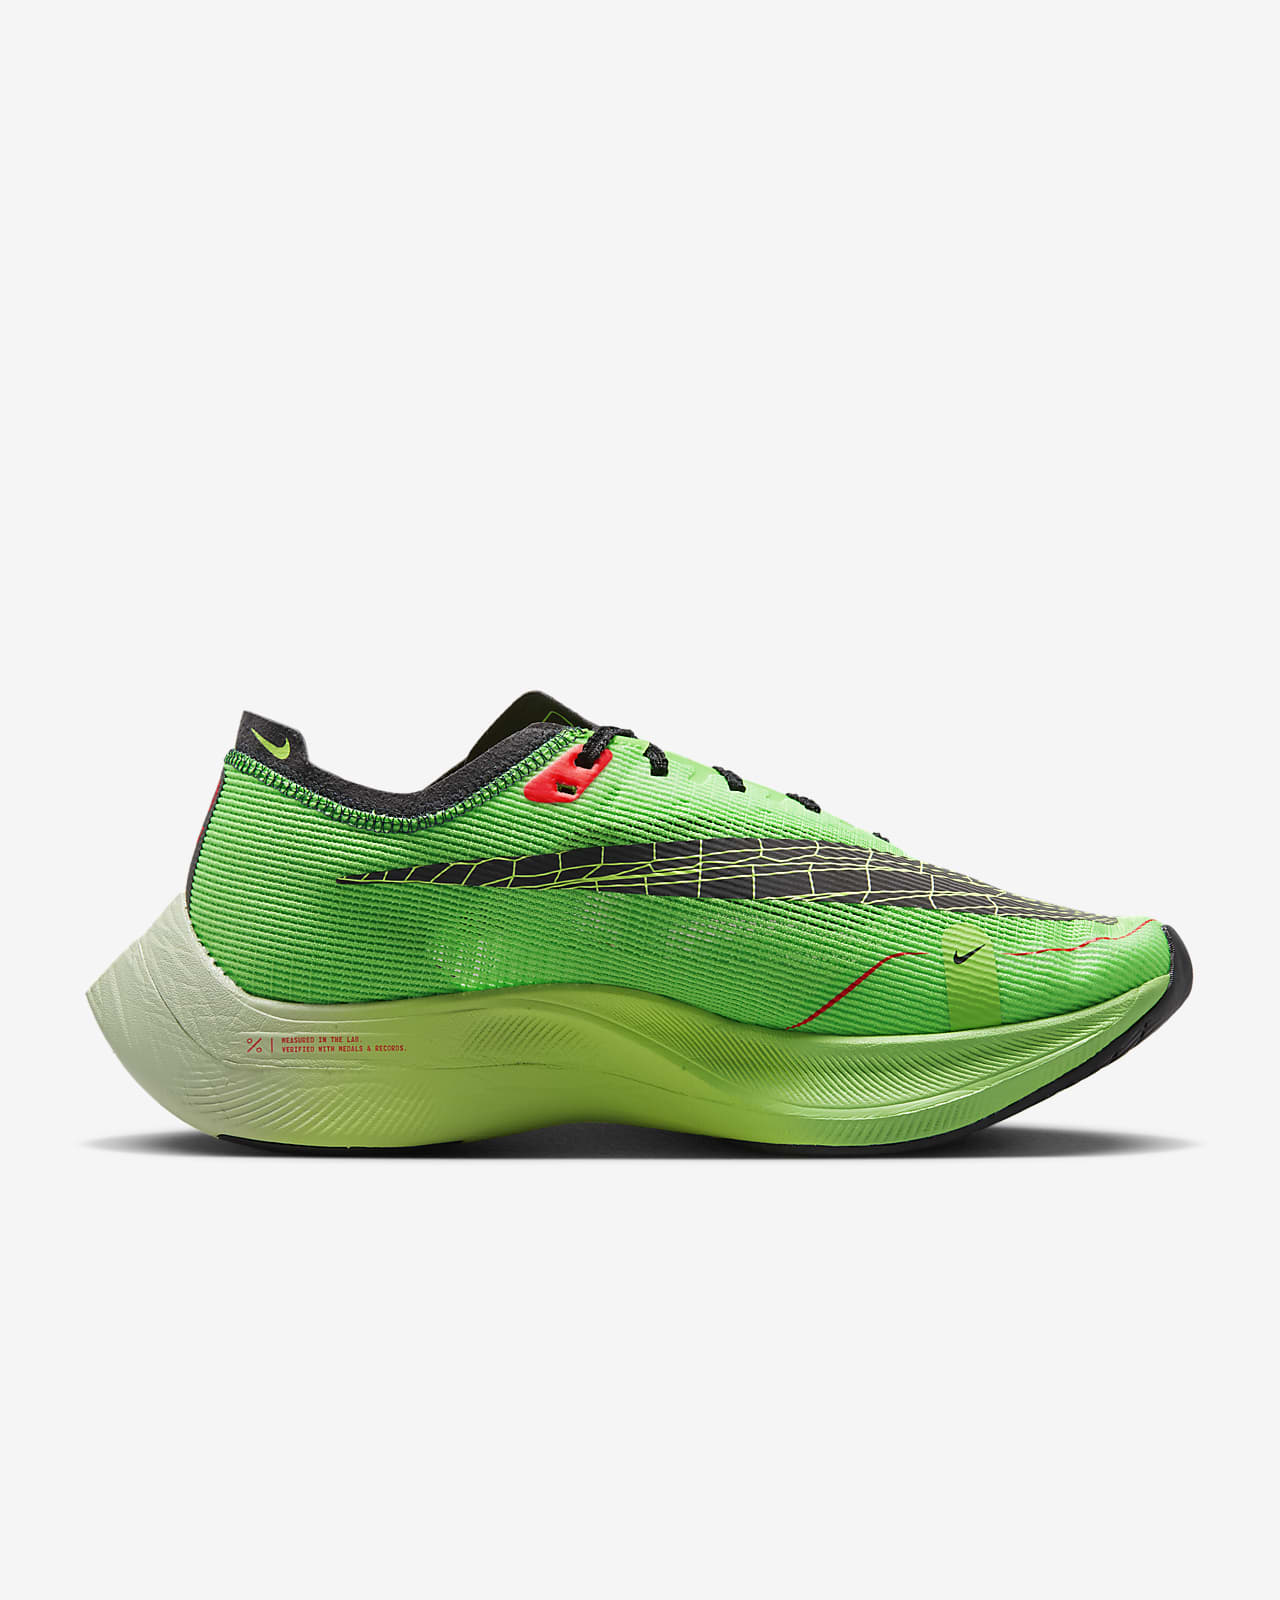 Vaporfly 2 Men's Road Racing Shoes. ID